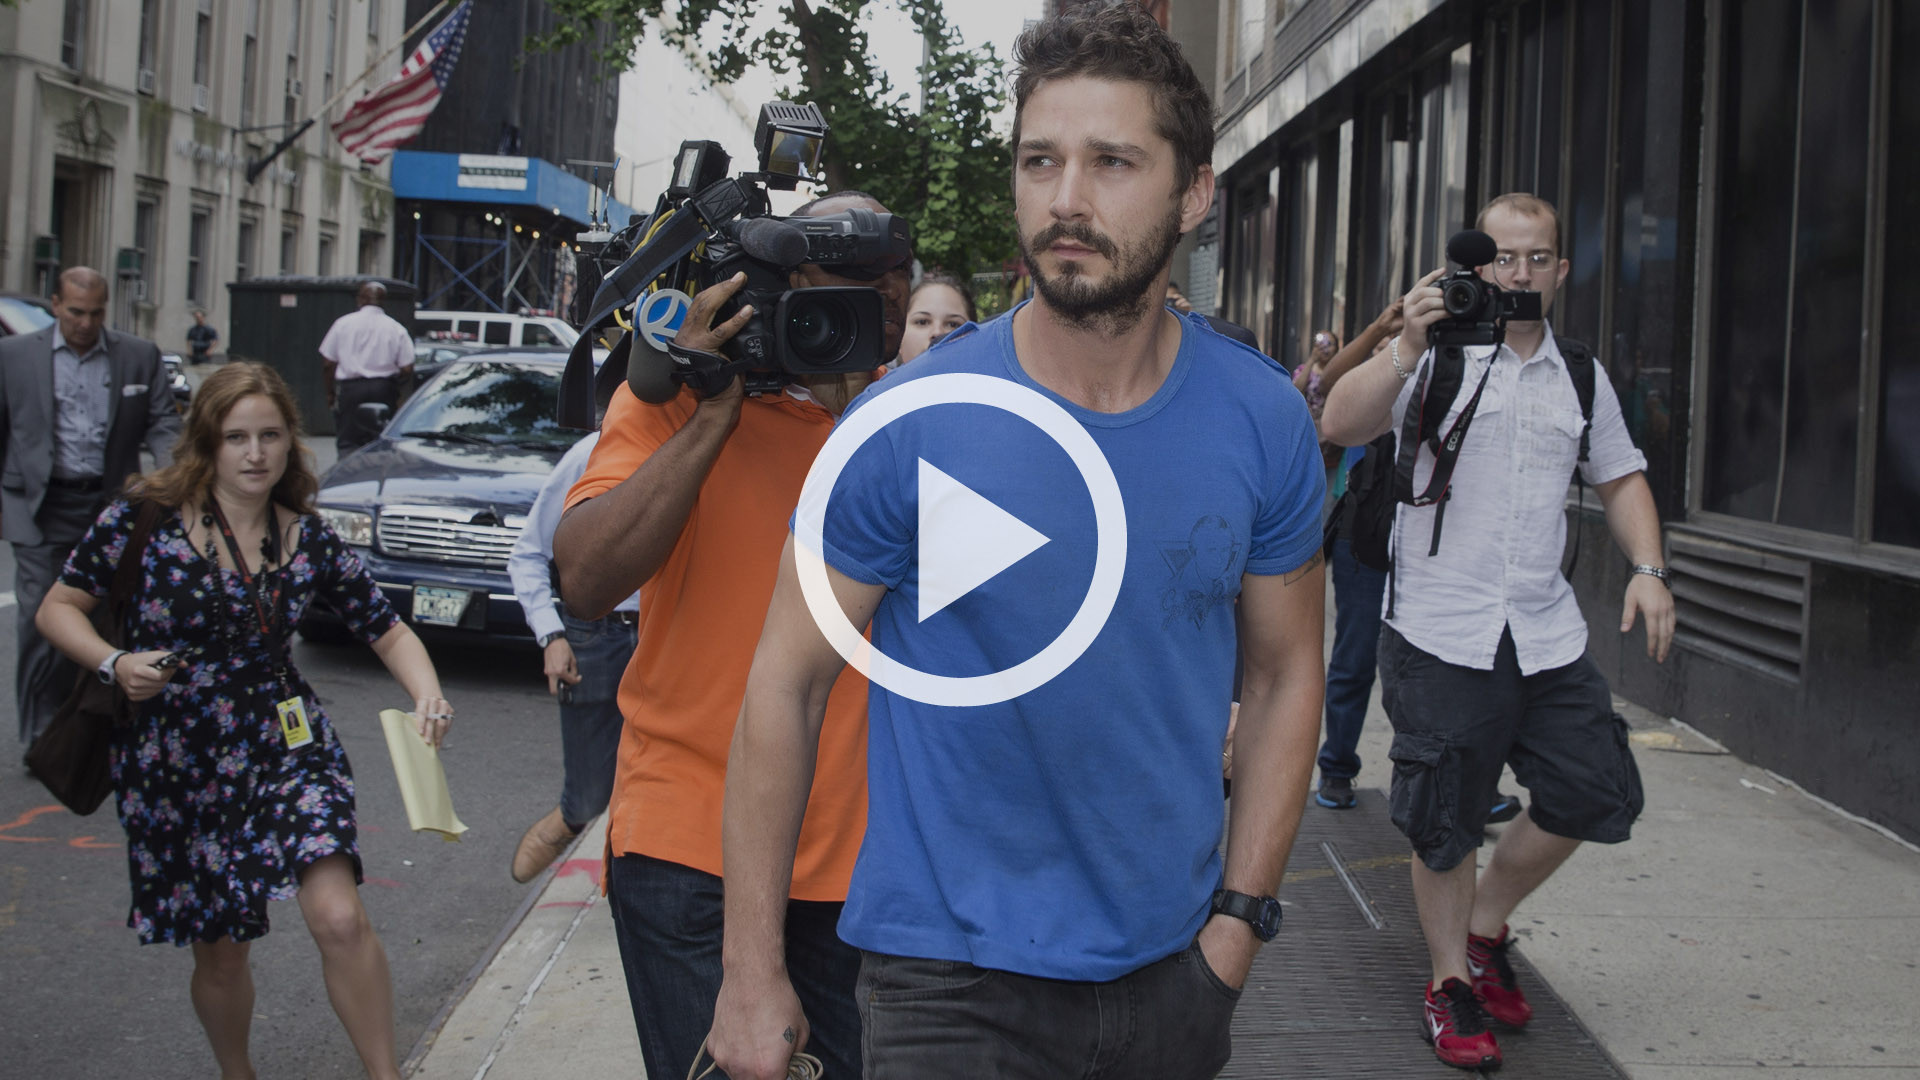 Shia LaBeouf arrested in disorderly conduct at Broadway show - LA Times